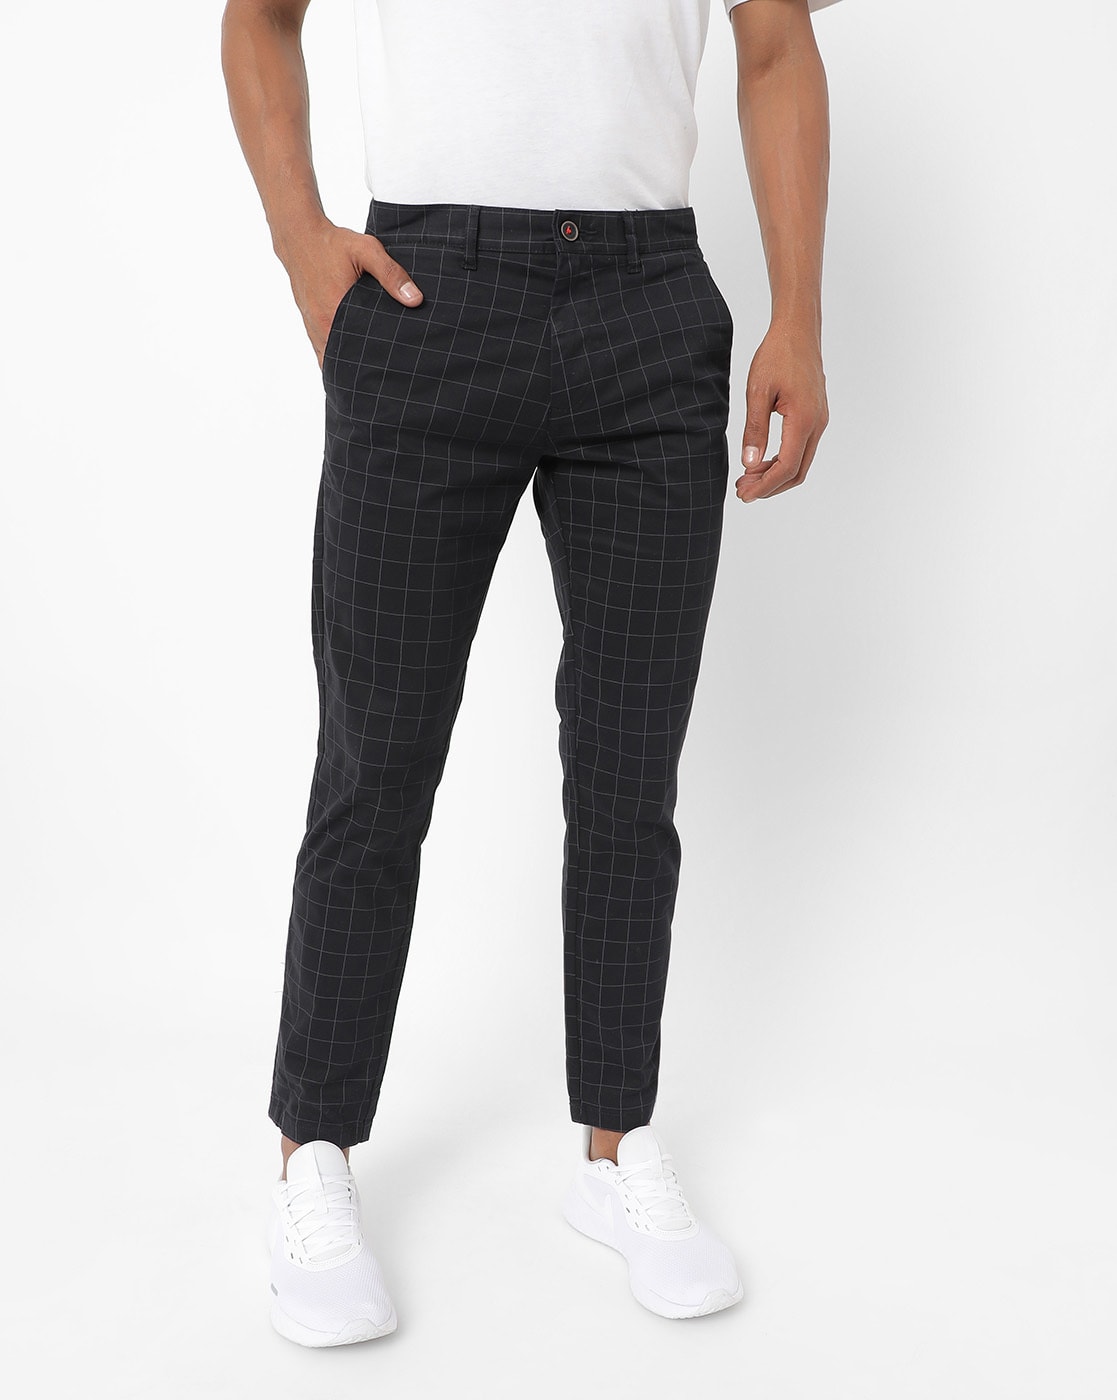 Navy Check Super Skinny Cropped Trousers Long Pants for Men  China Joggers  and Men Pants price  MadeinChinacom